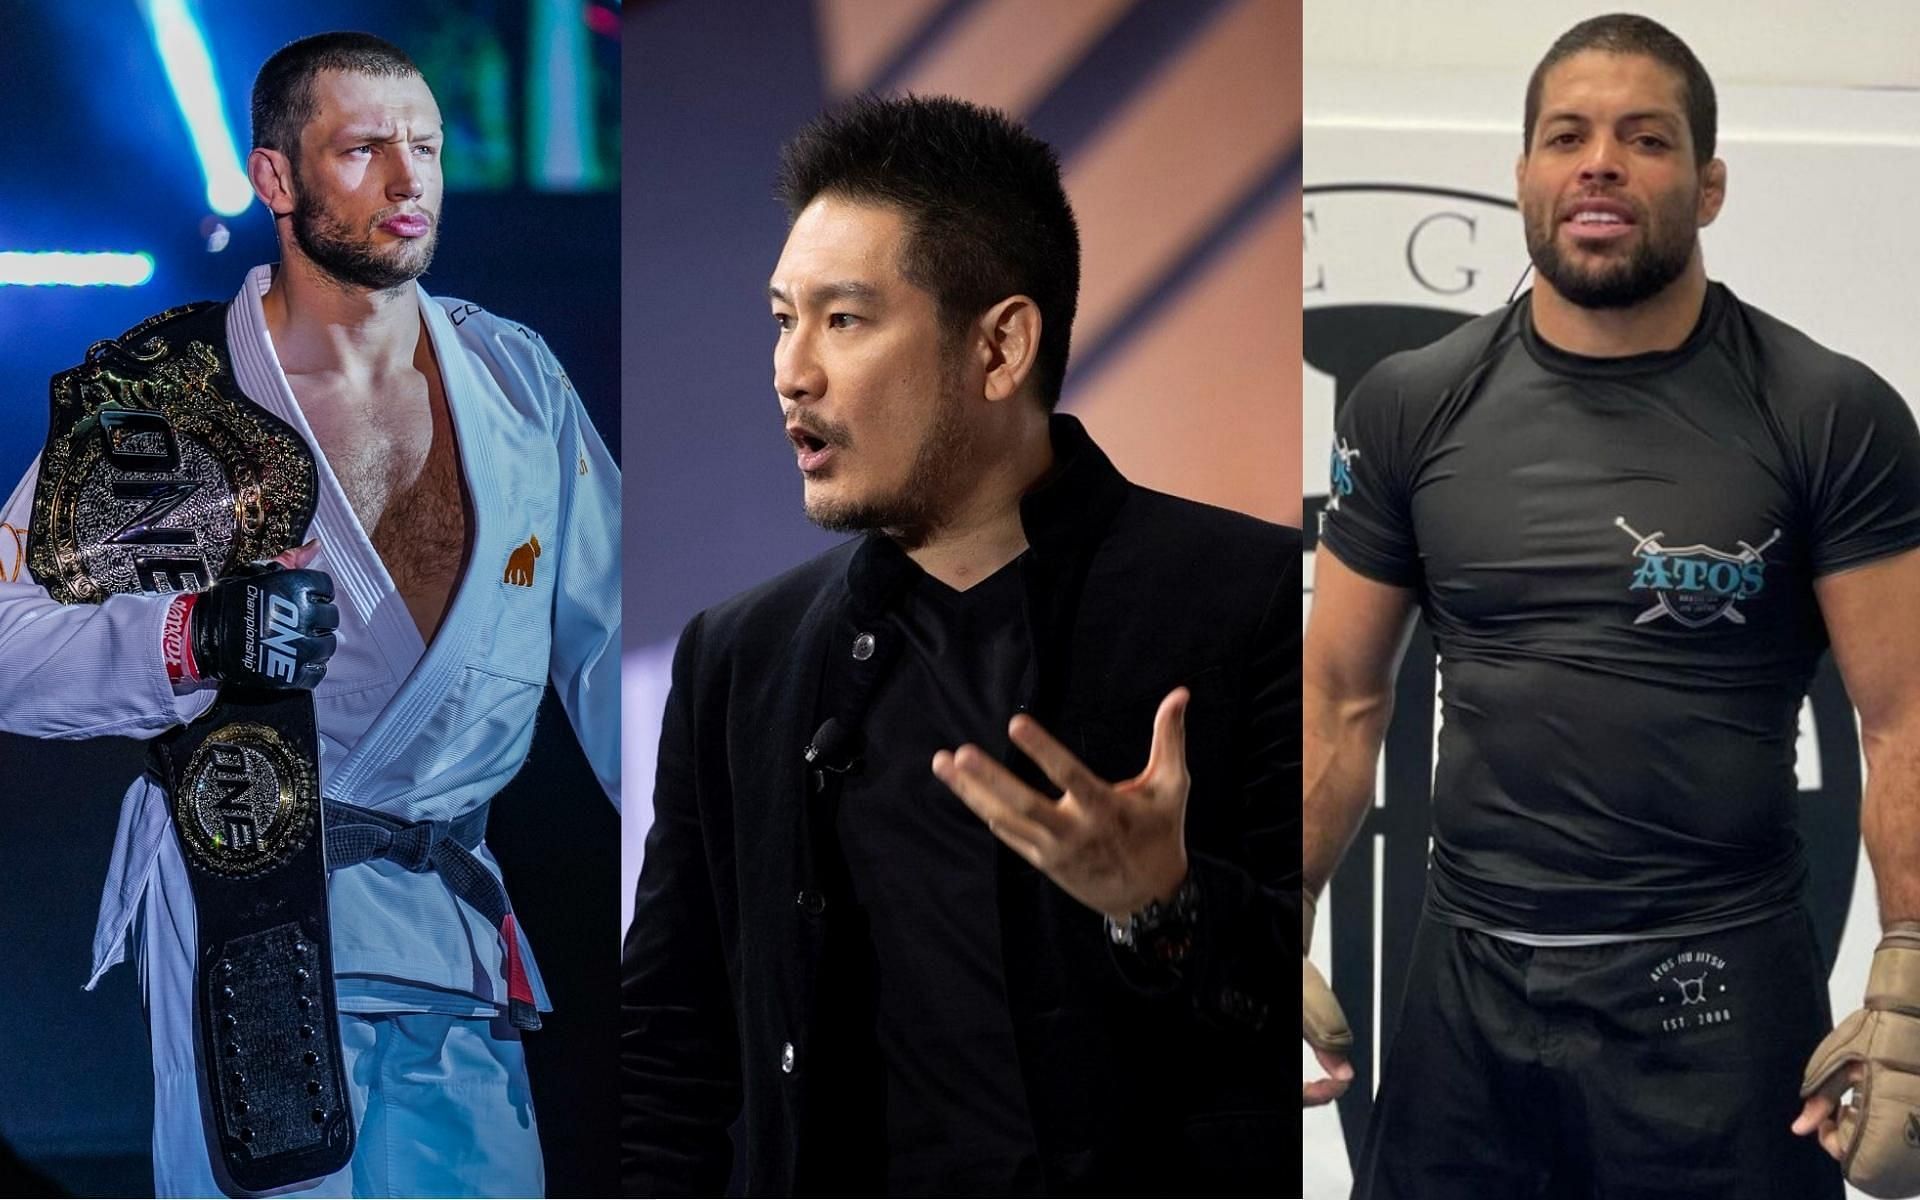 ONE CEO Chatri Sityodtong (middle) thinks Reinier de Ridder (left) is &quot;crazy&quot; for fighting Andre Galvao (right) in a submission grappling match at ONE X. (Images courtesy of ONE Championship)